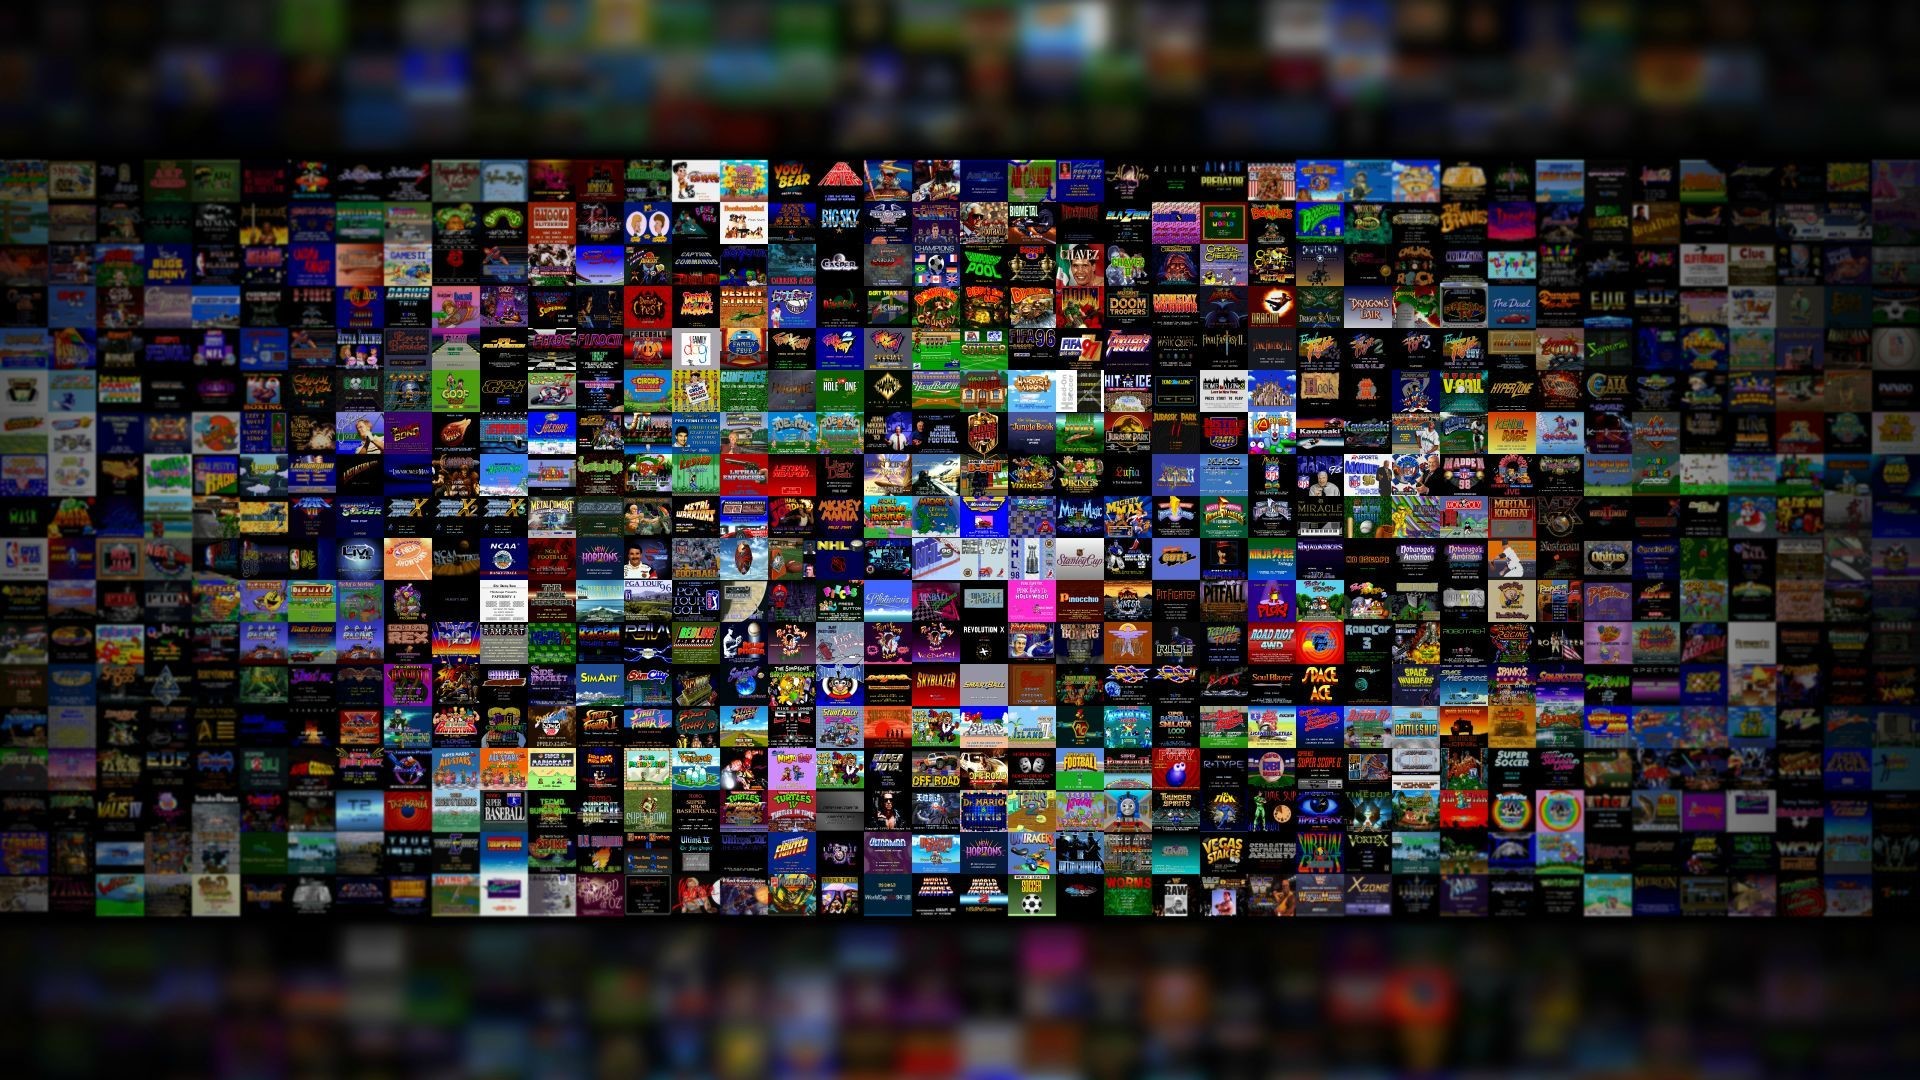 700 Snes Game Title Screen Wallpaper For You Guys - Snes Wall Paper - HD Wallpaper 